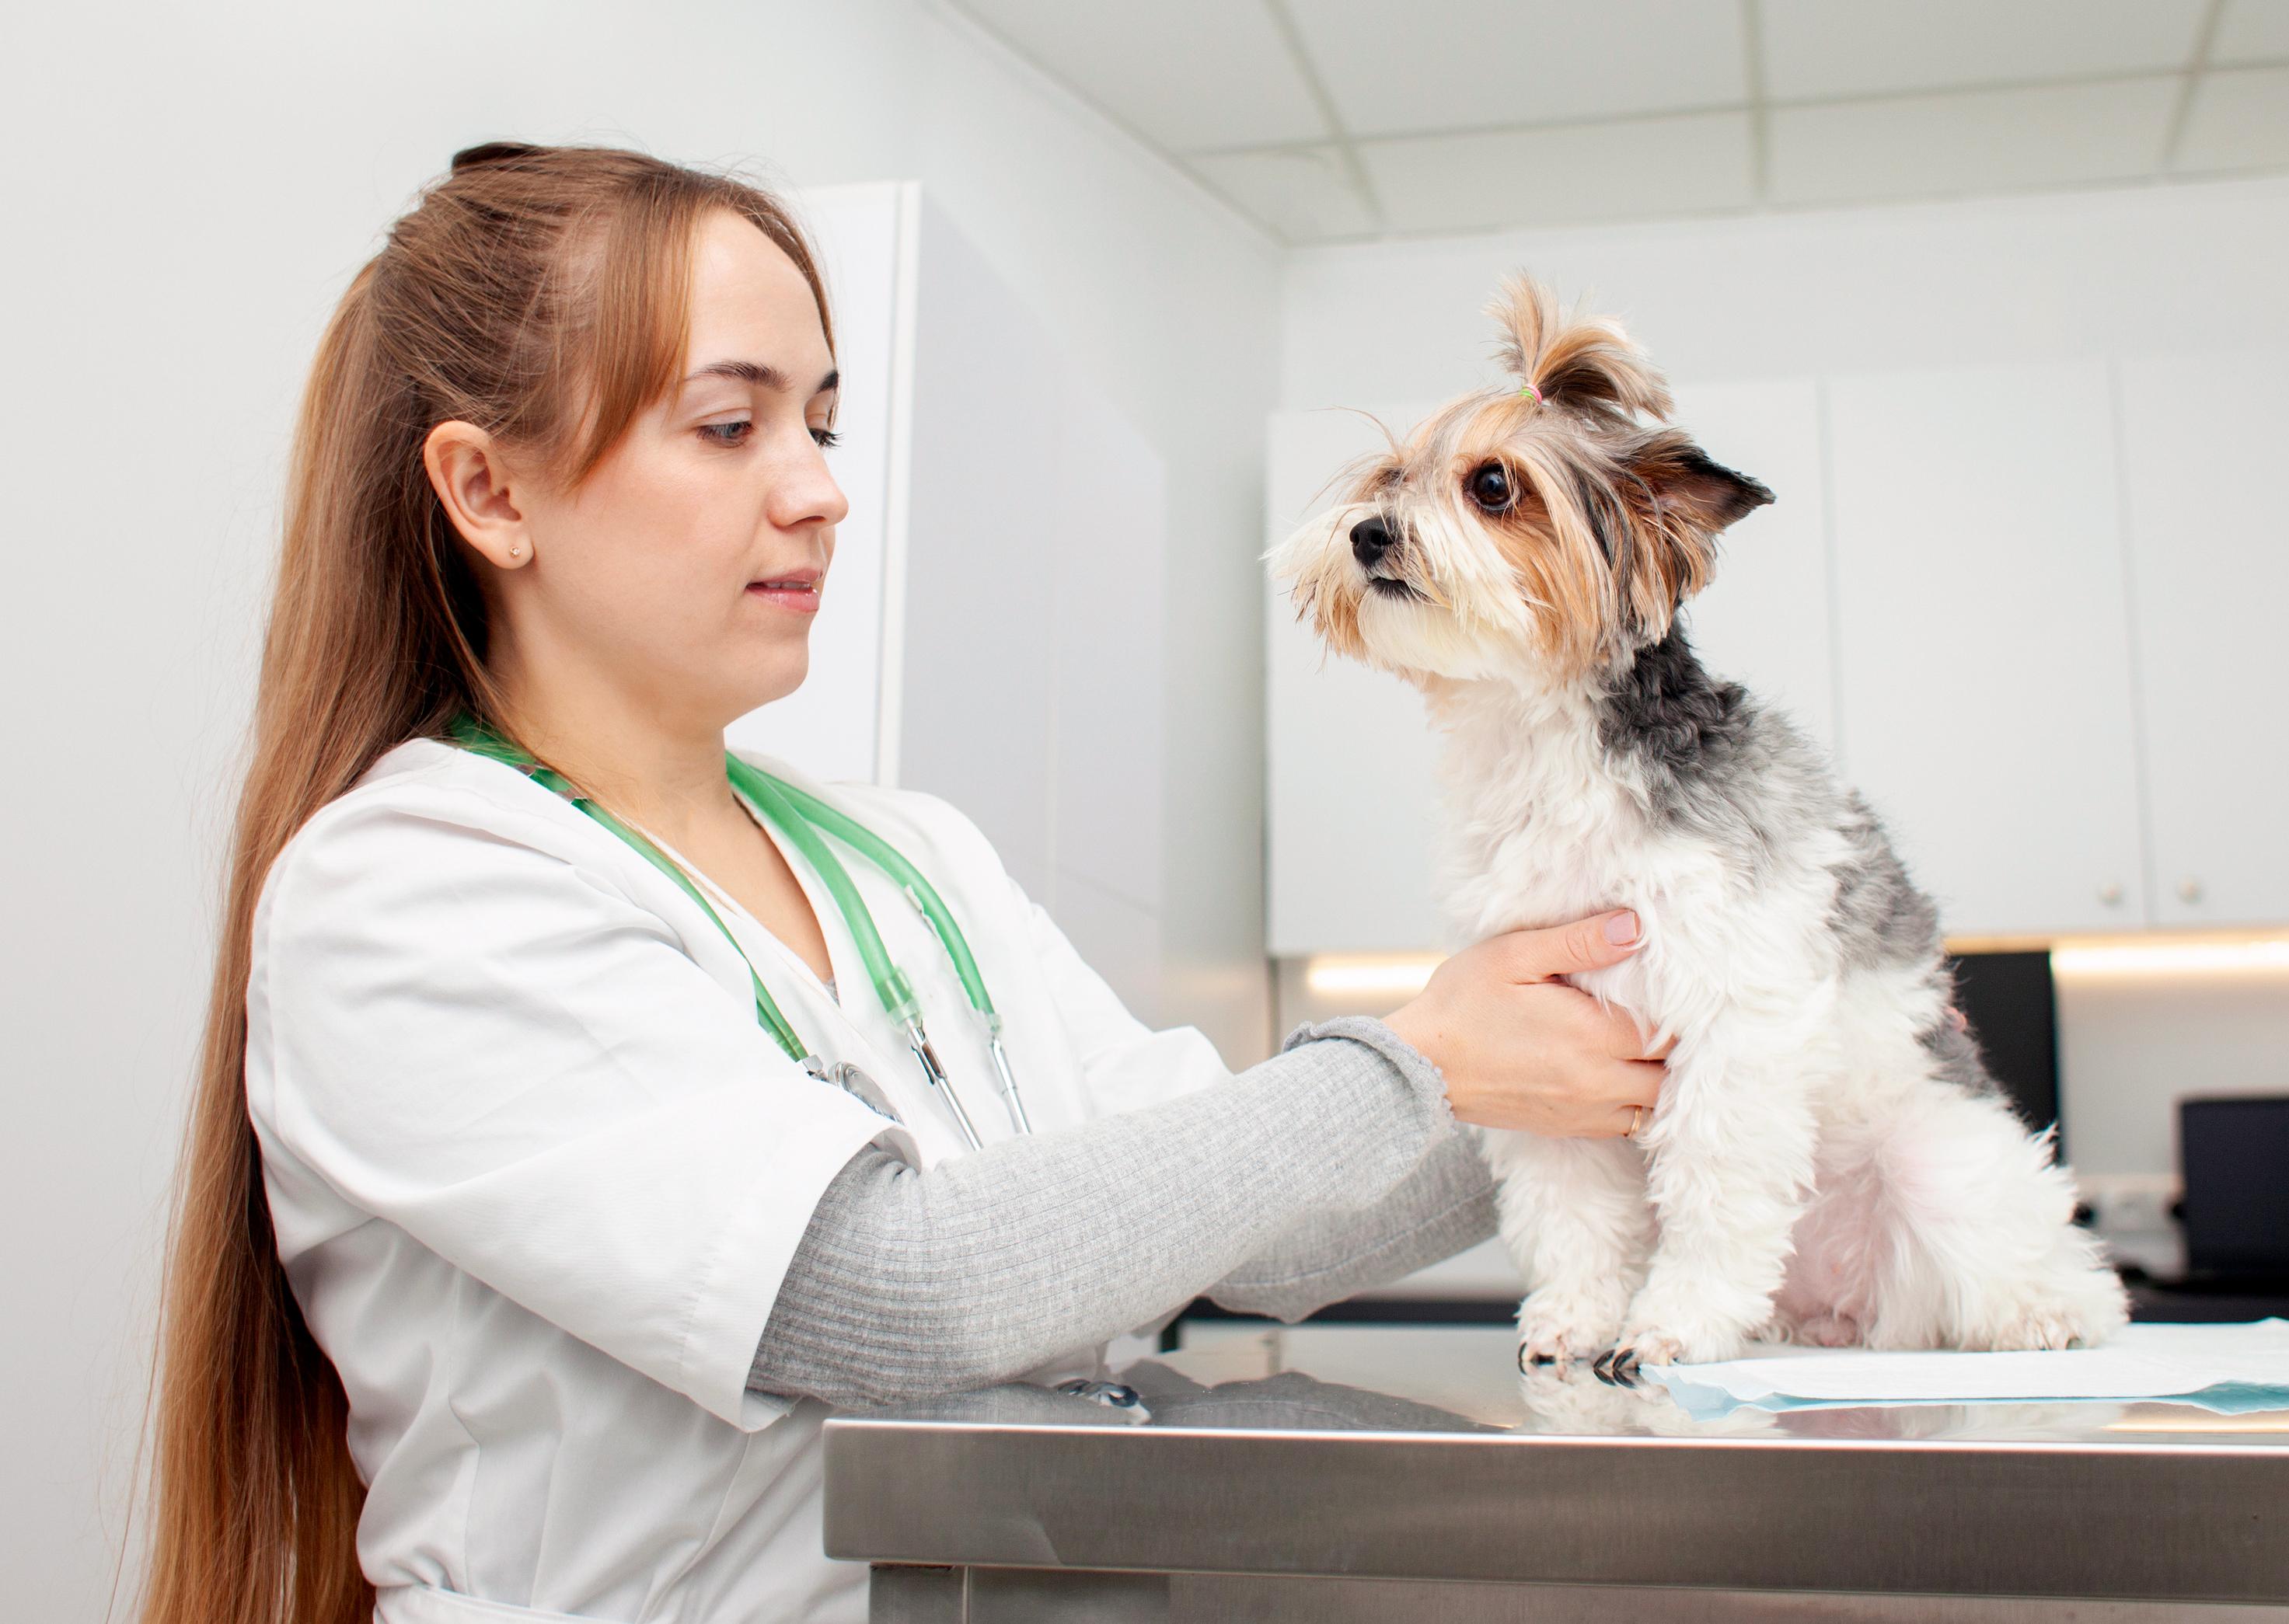 A vet doctor is treating a dog.